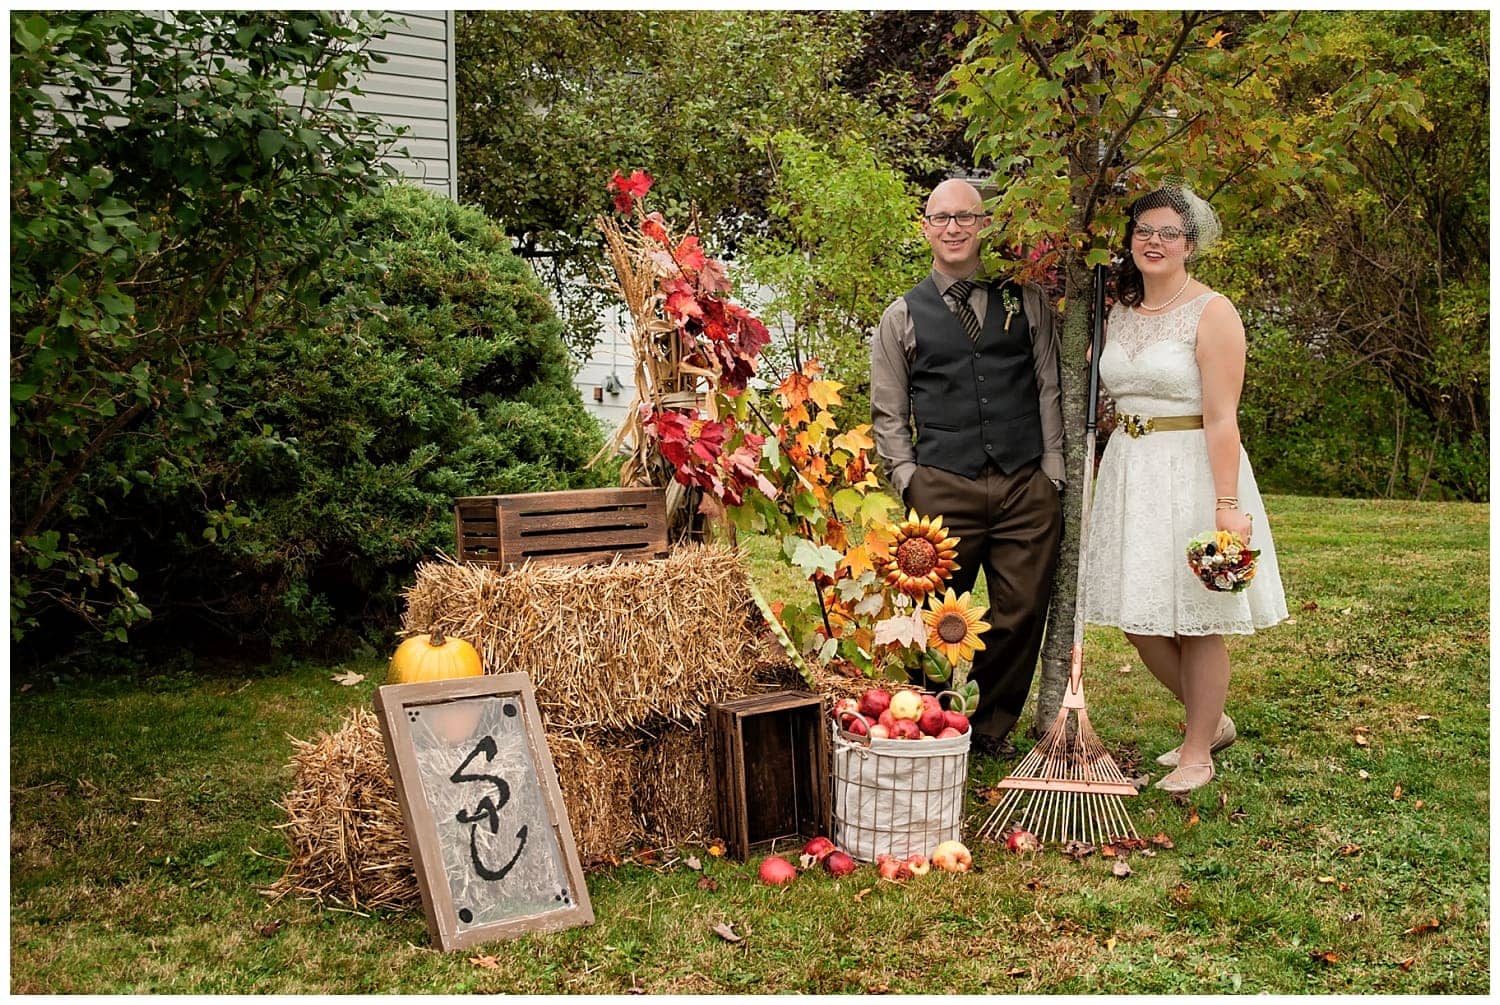 The bride and groom created a beautiful fall setting for their wedding photos during their backyard wedding in Dartmouth, NS.